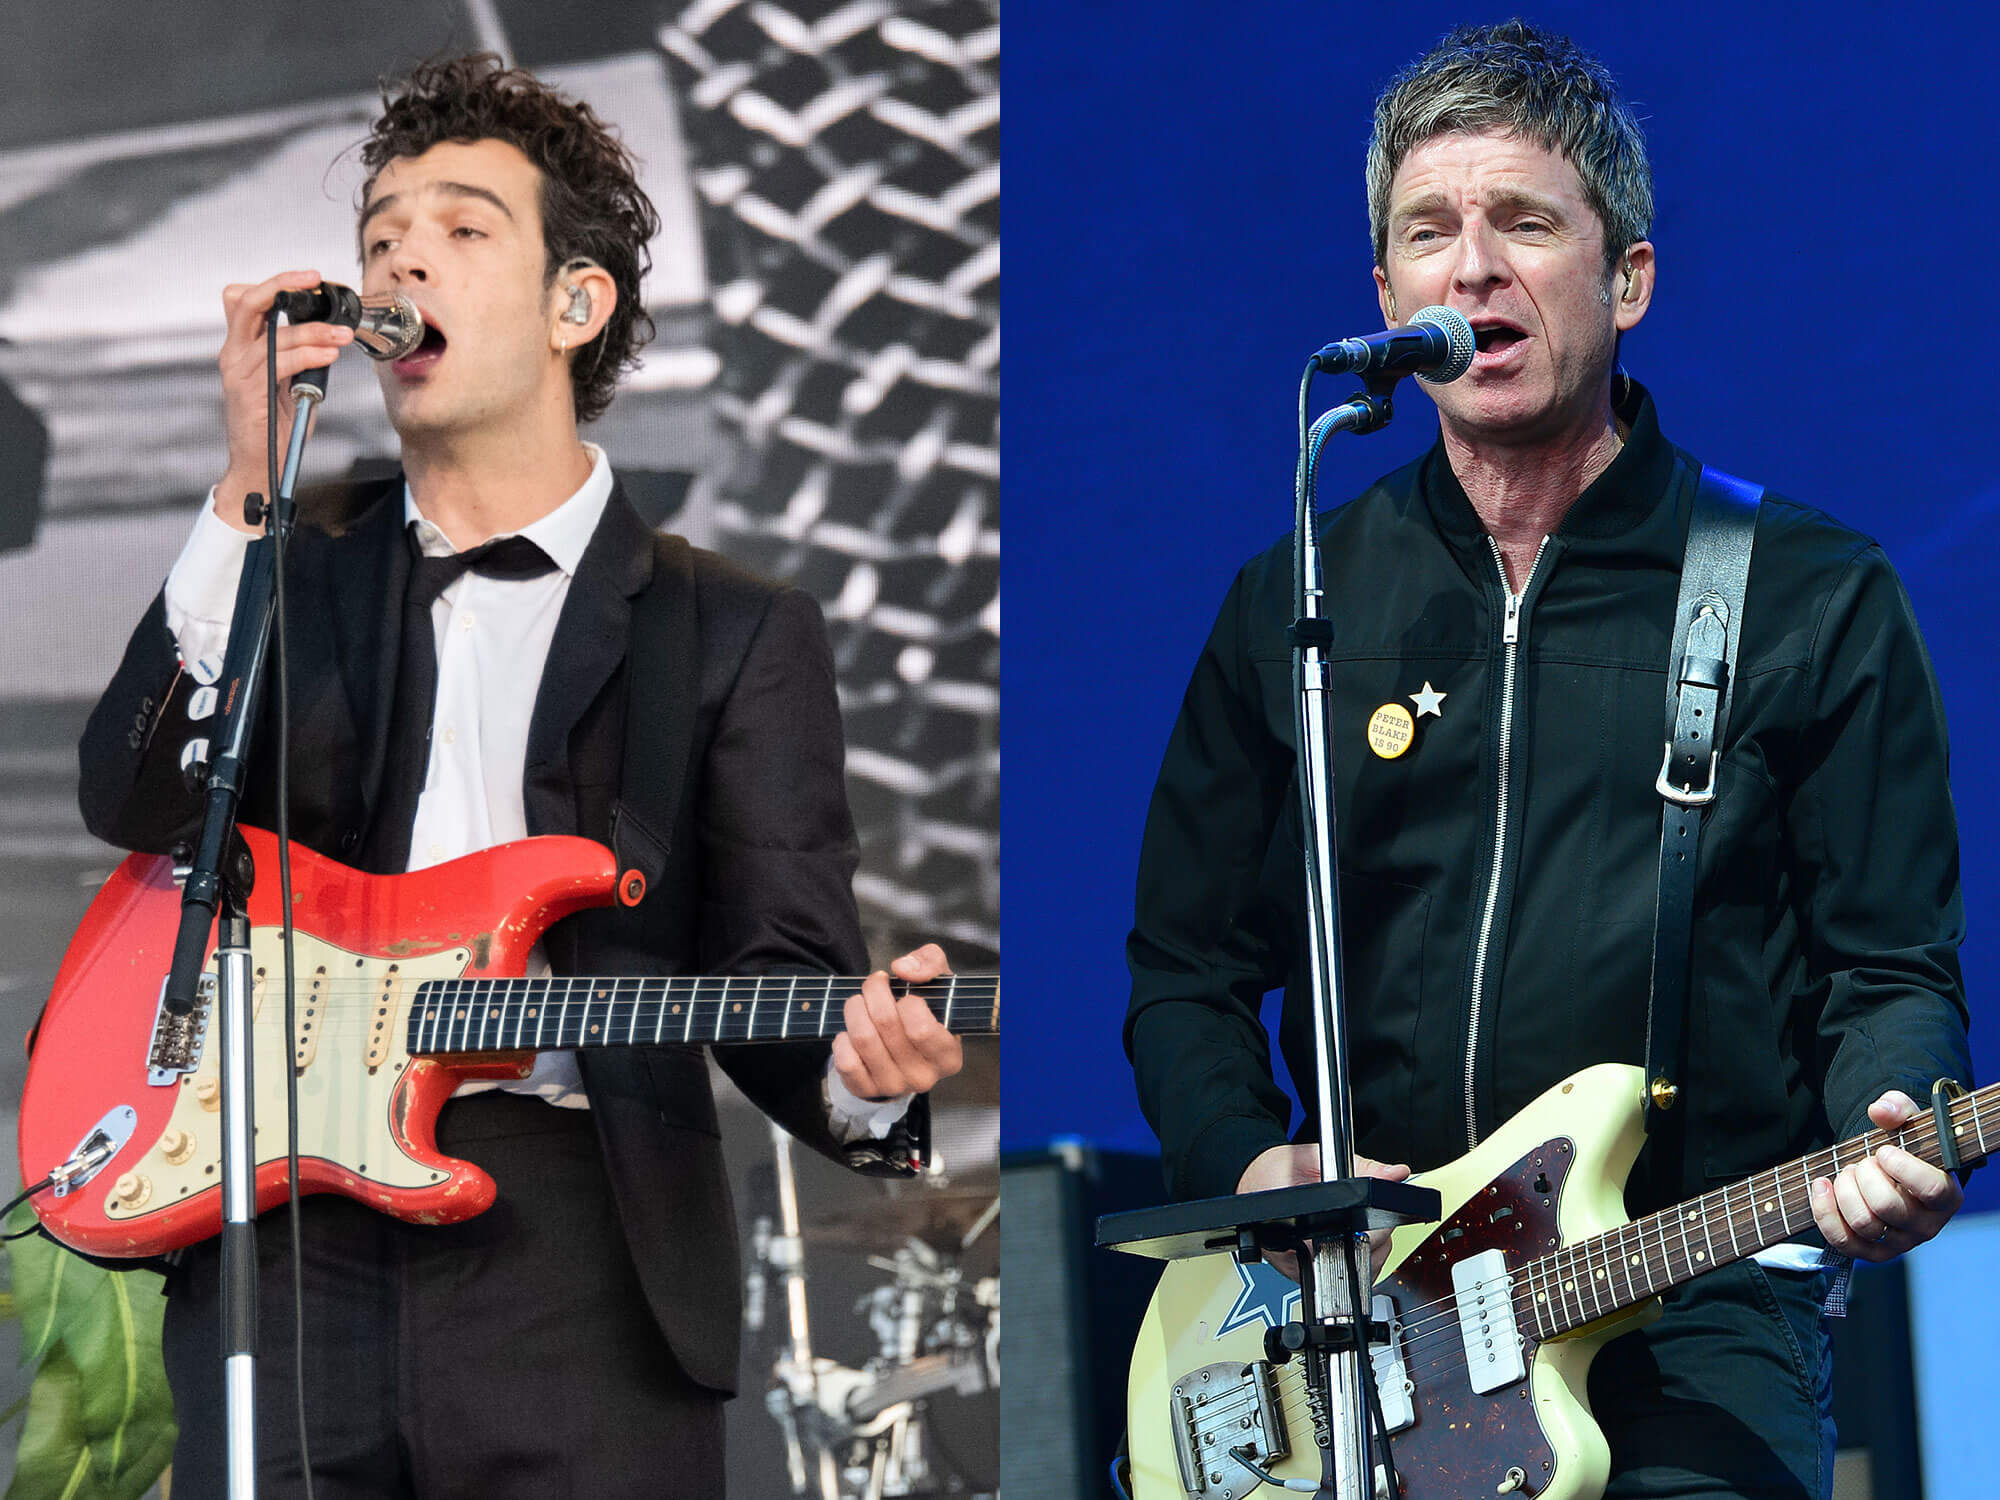 [L-R] Matty Healy and Noel Gallagher